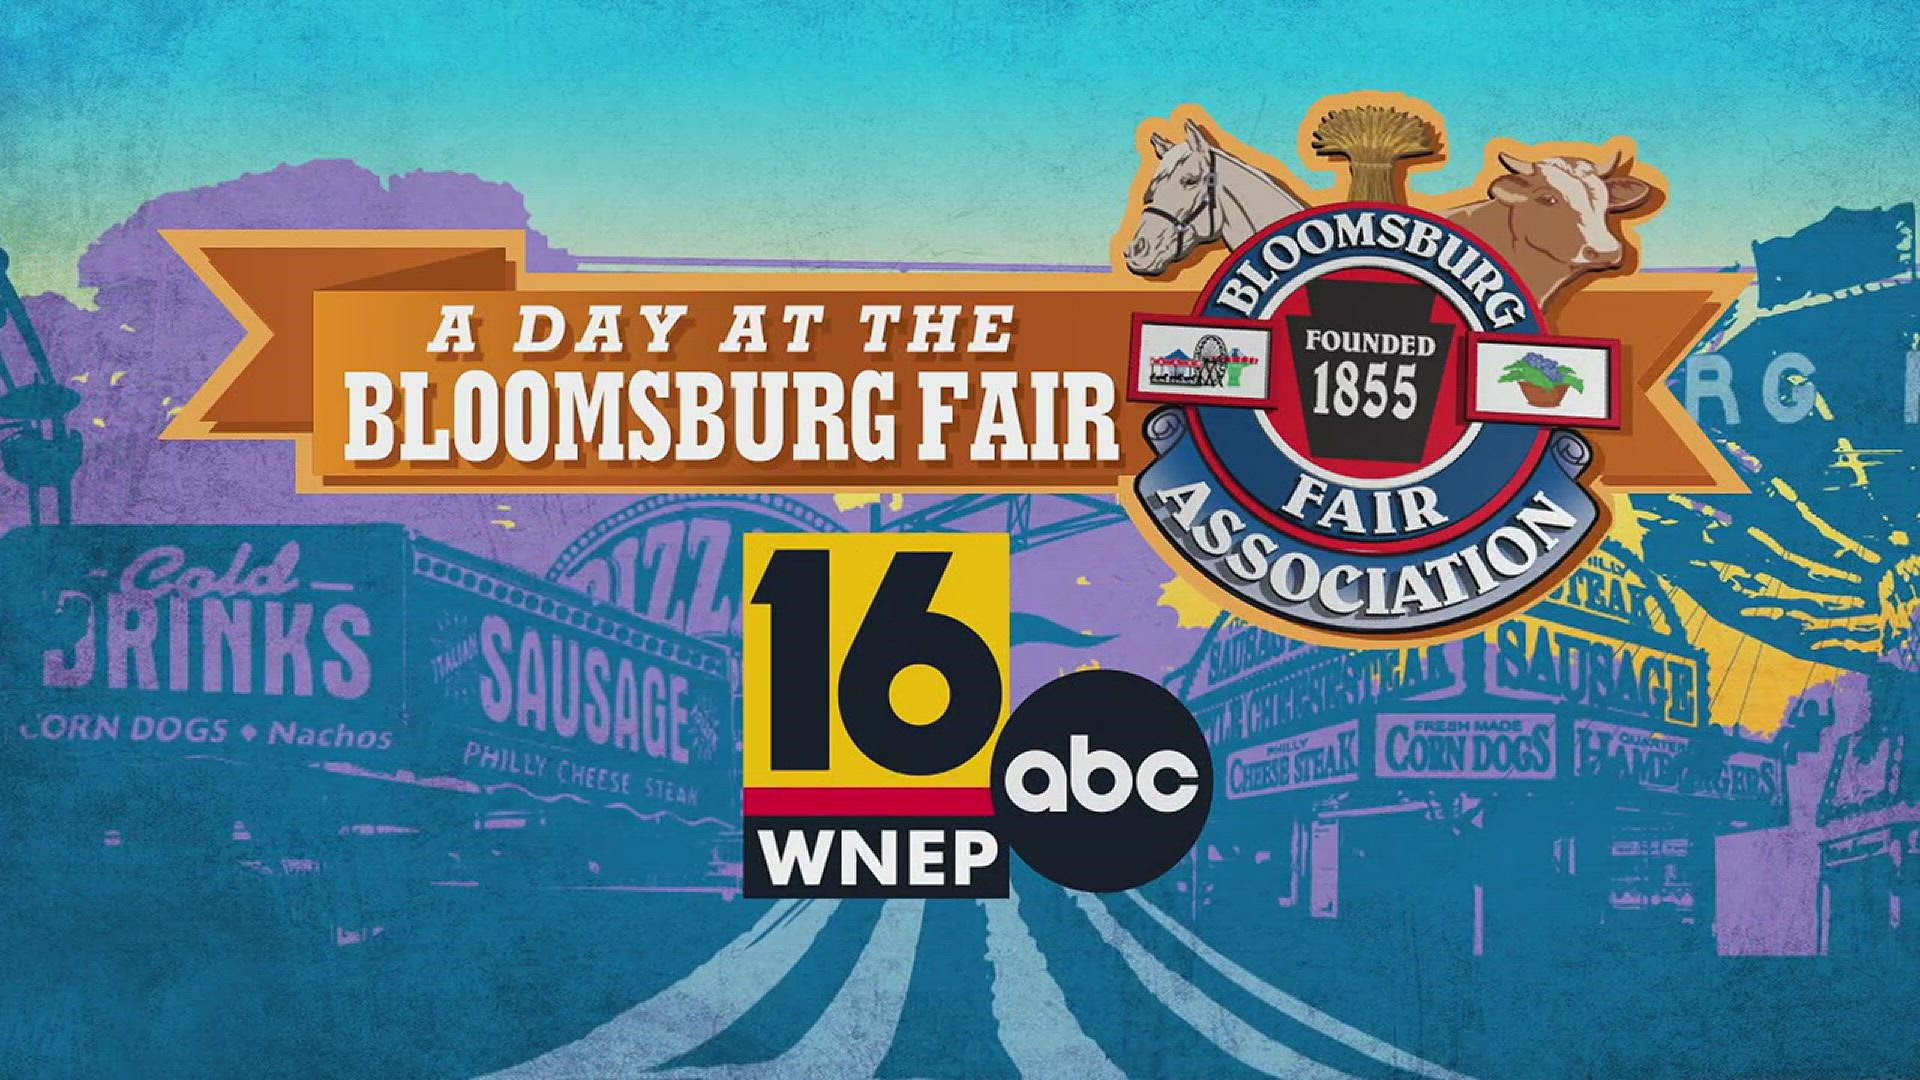 See all the food, fun and more at the Bloomsburg Fair.